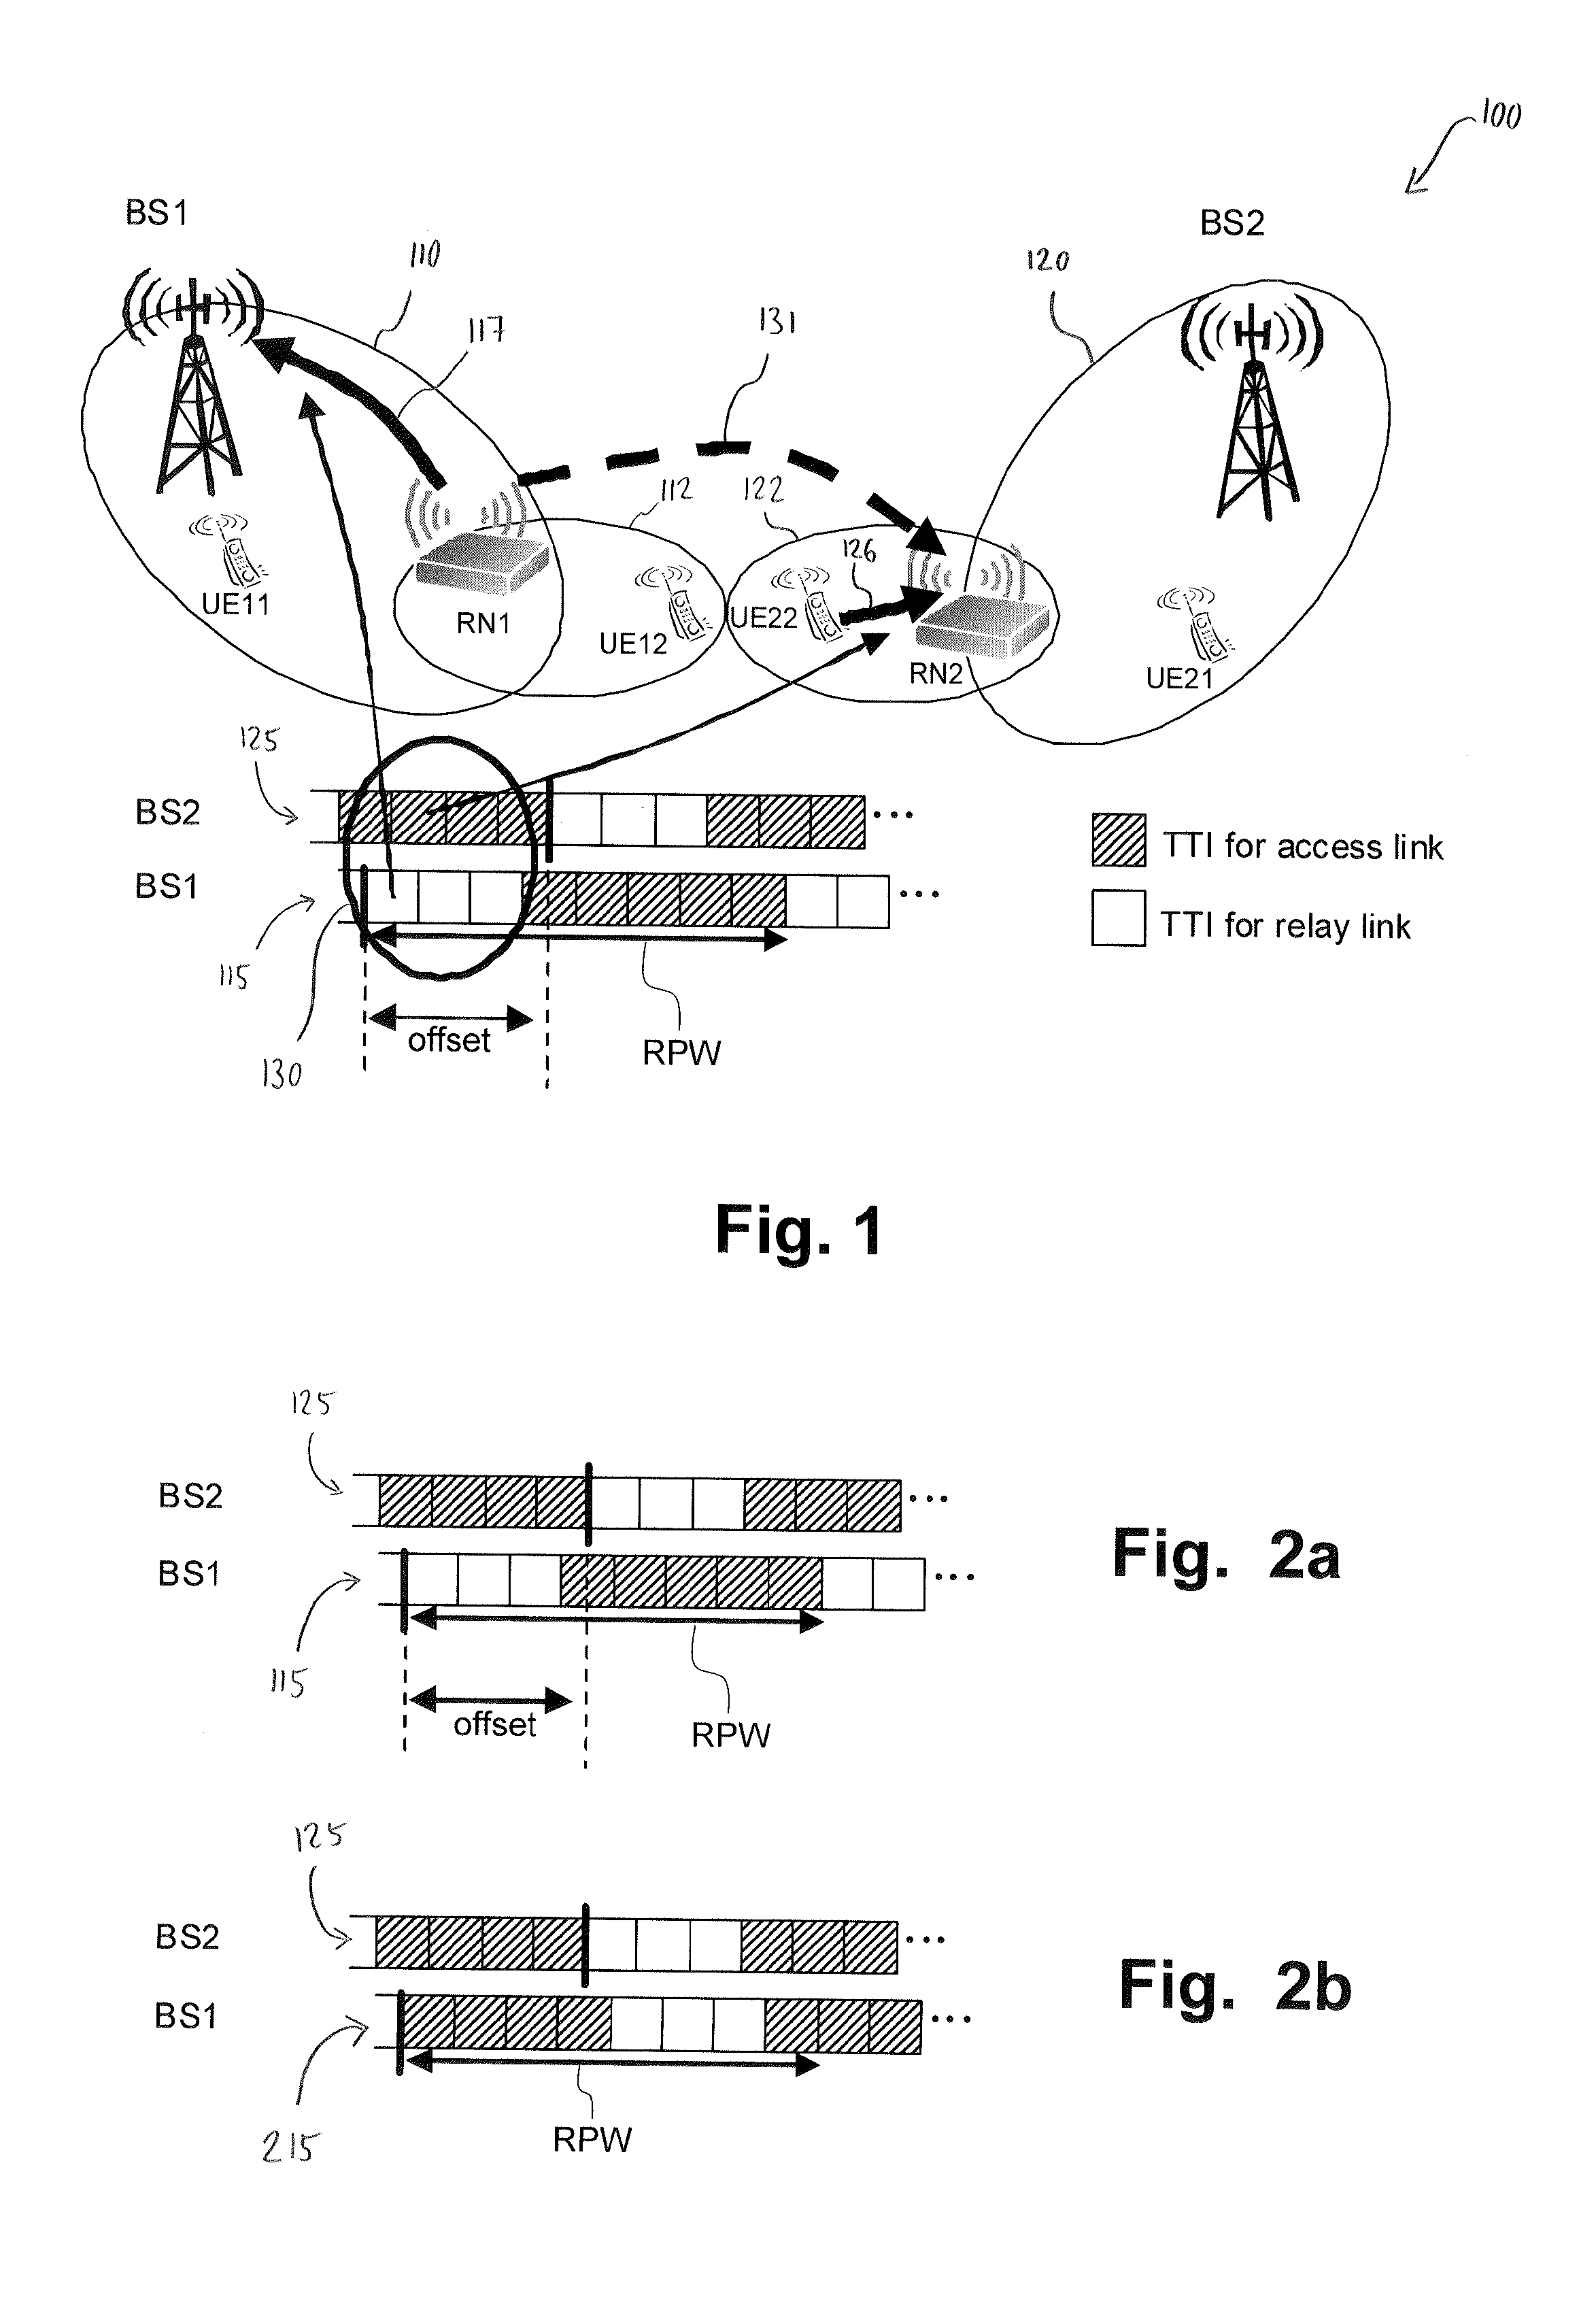 Coordinating Radio Resource Partitioning in a Relay Enhanced Telecommunication Network